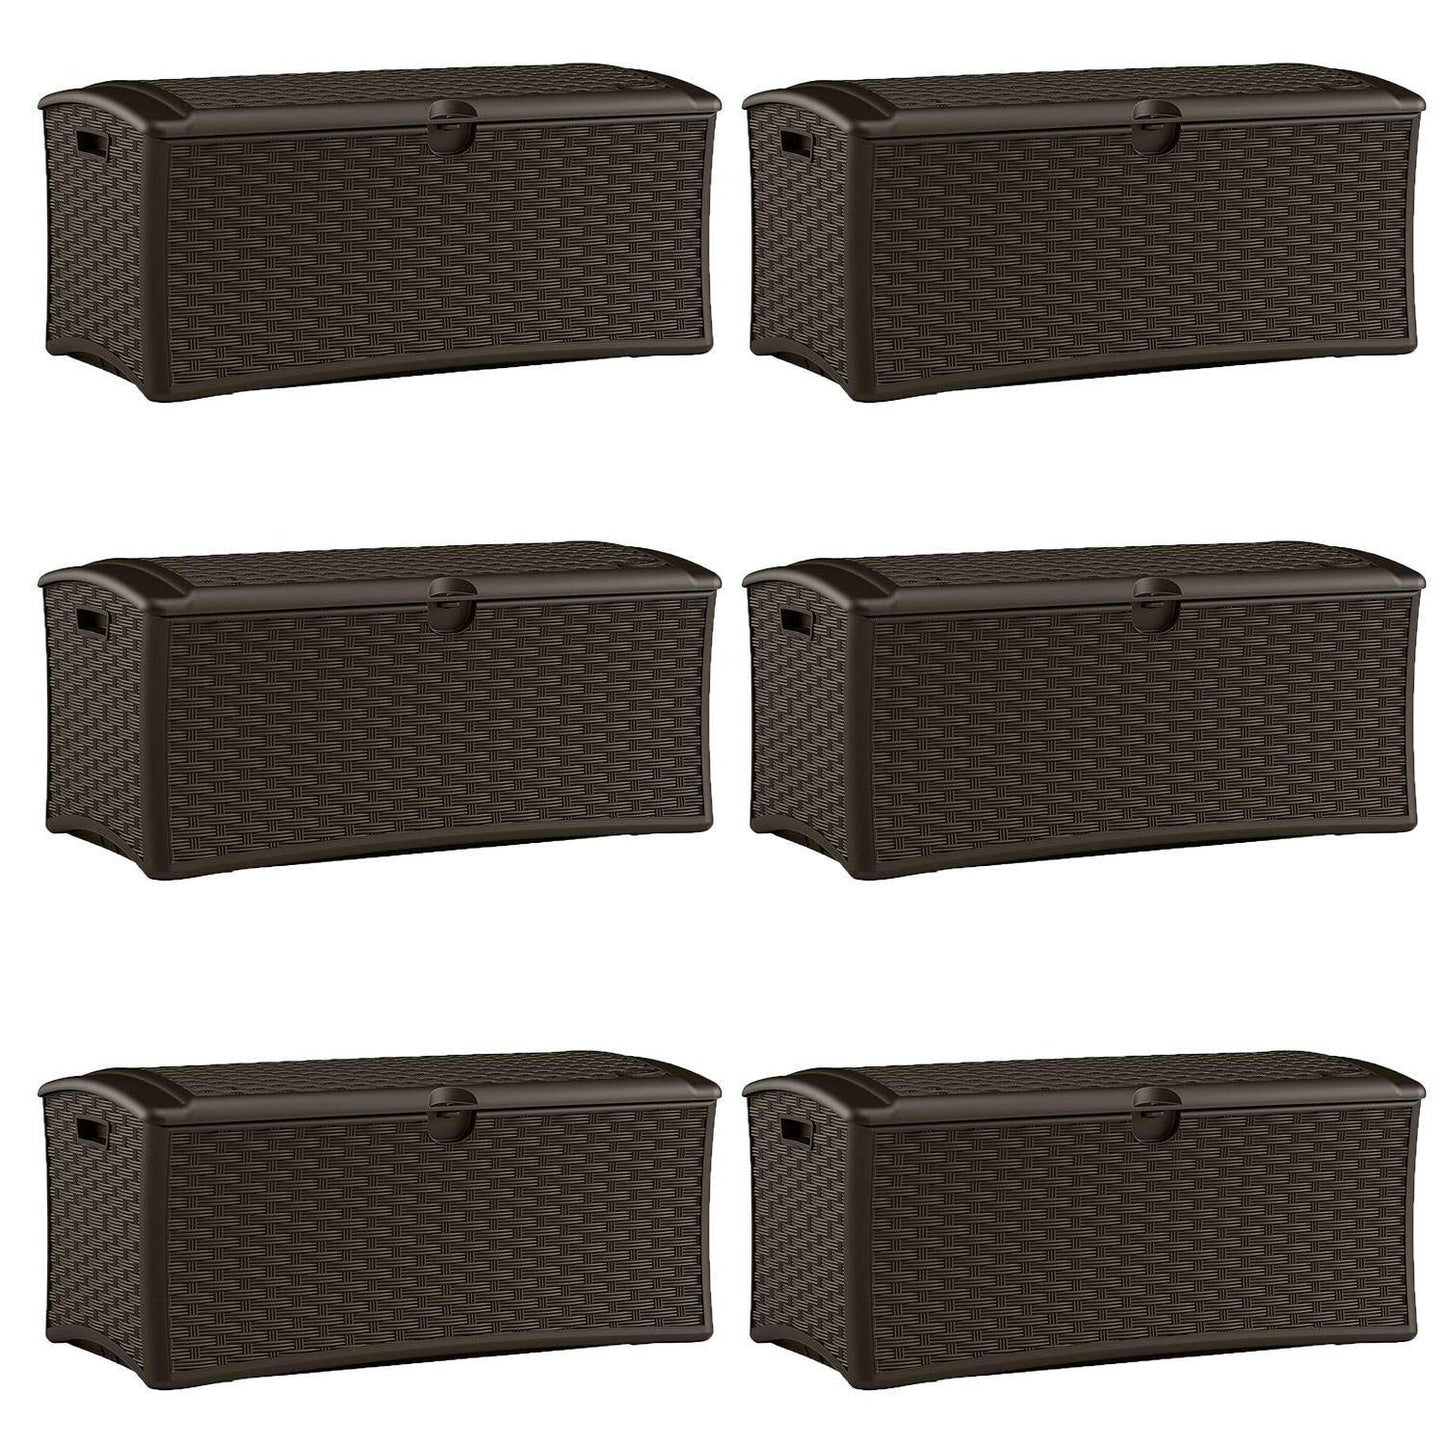 Suncast 72 Gallon Resin Wicker Outdoor Patio Storage Deck Box, Brown (6 Pack) 72 gallon - 6 Pack